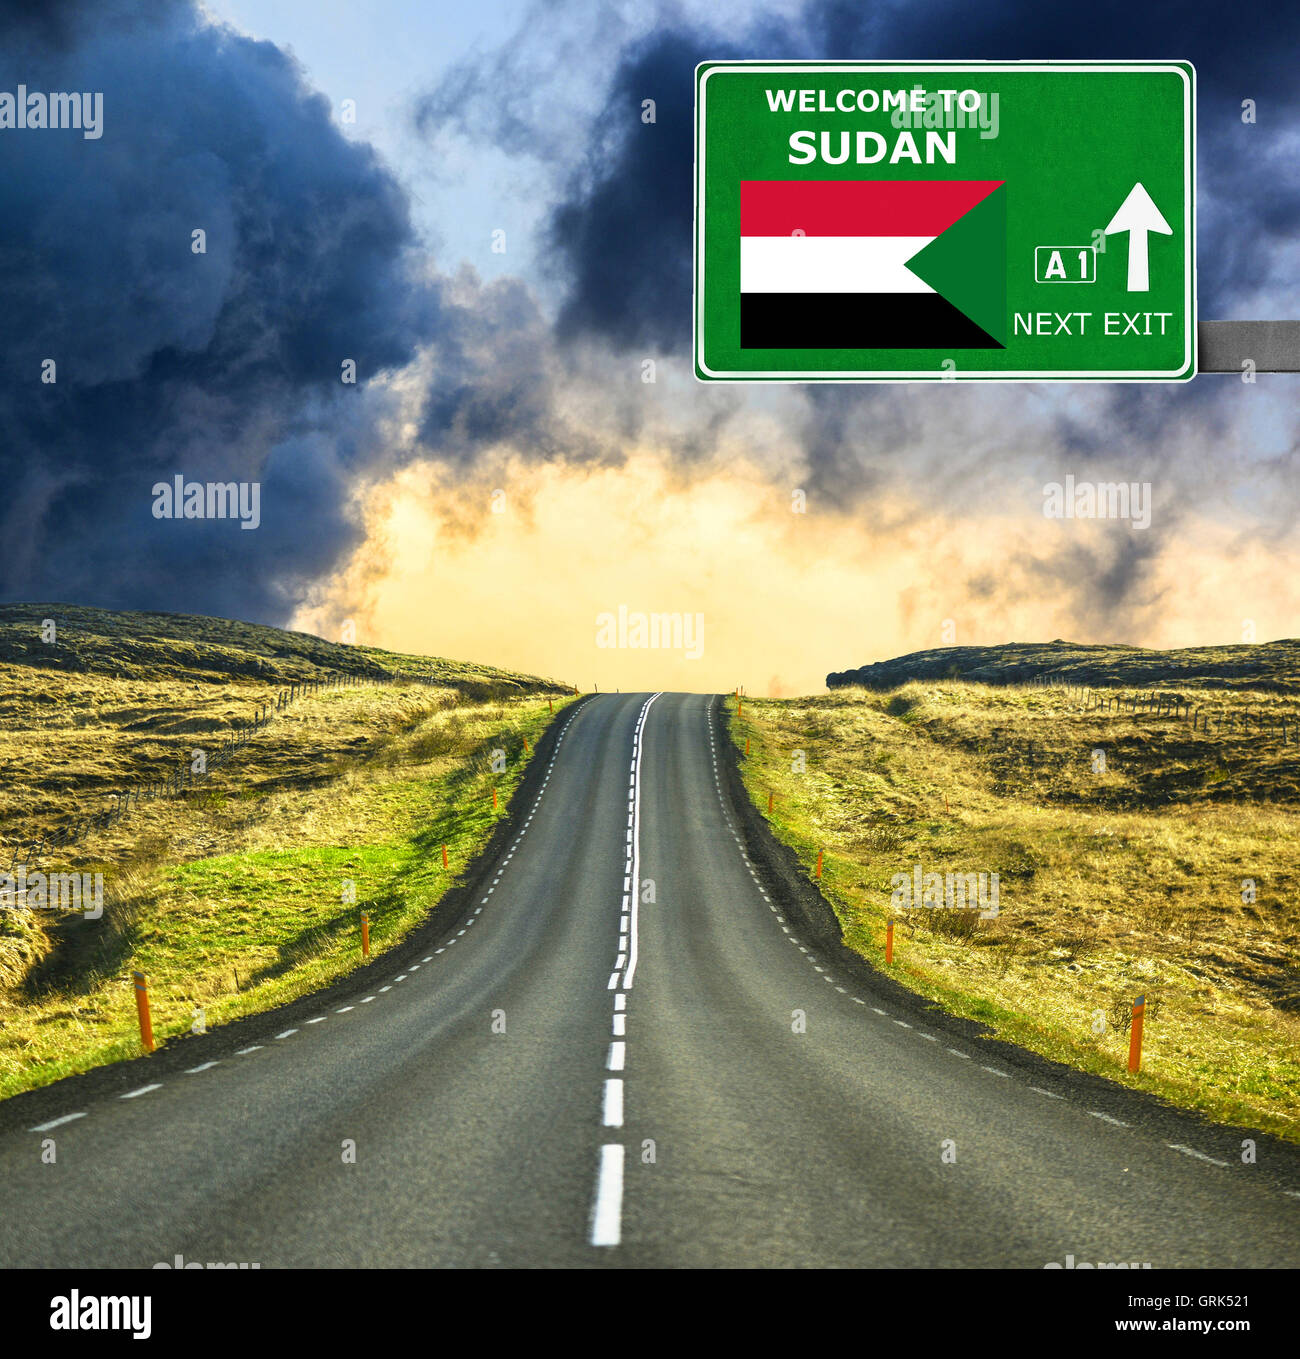 Sudan road sign against clear blue sky Stock Photo